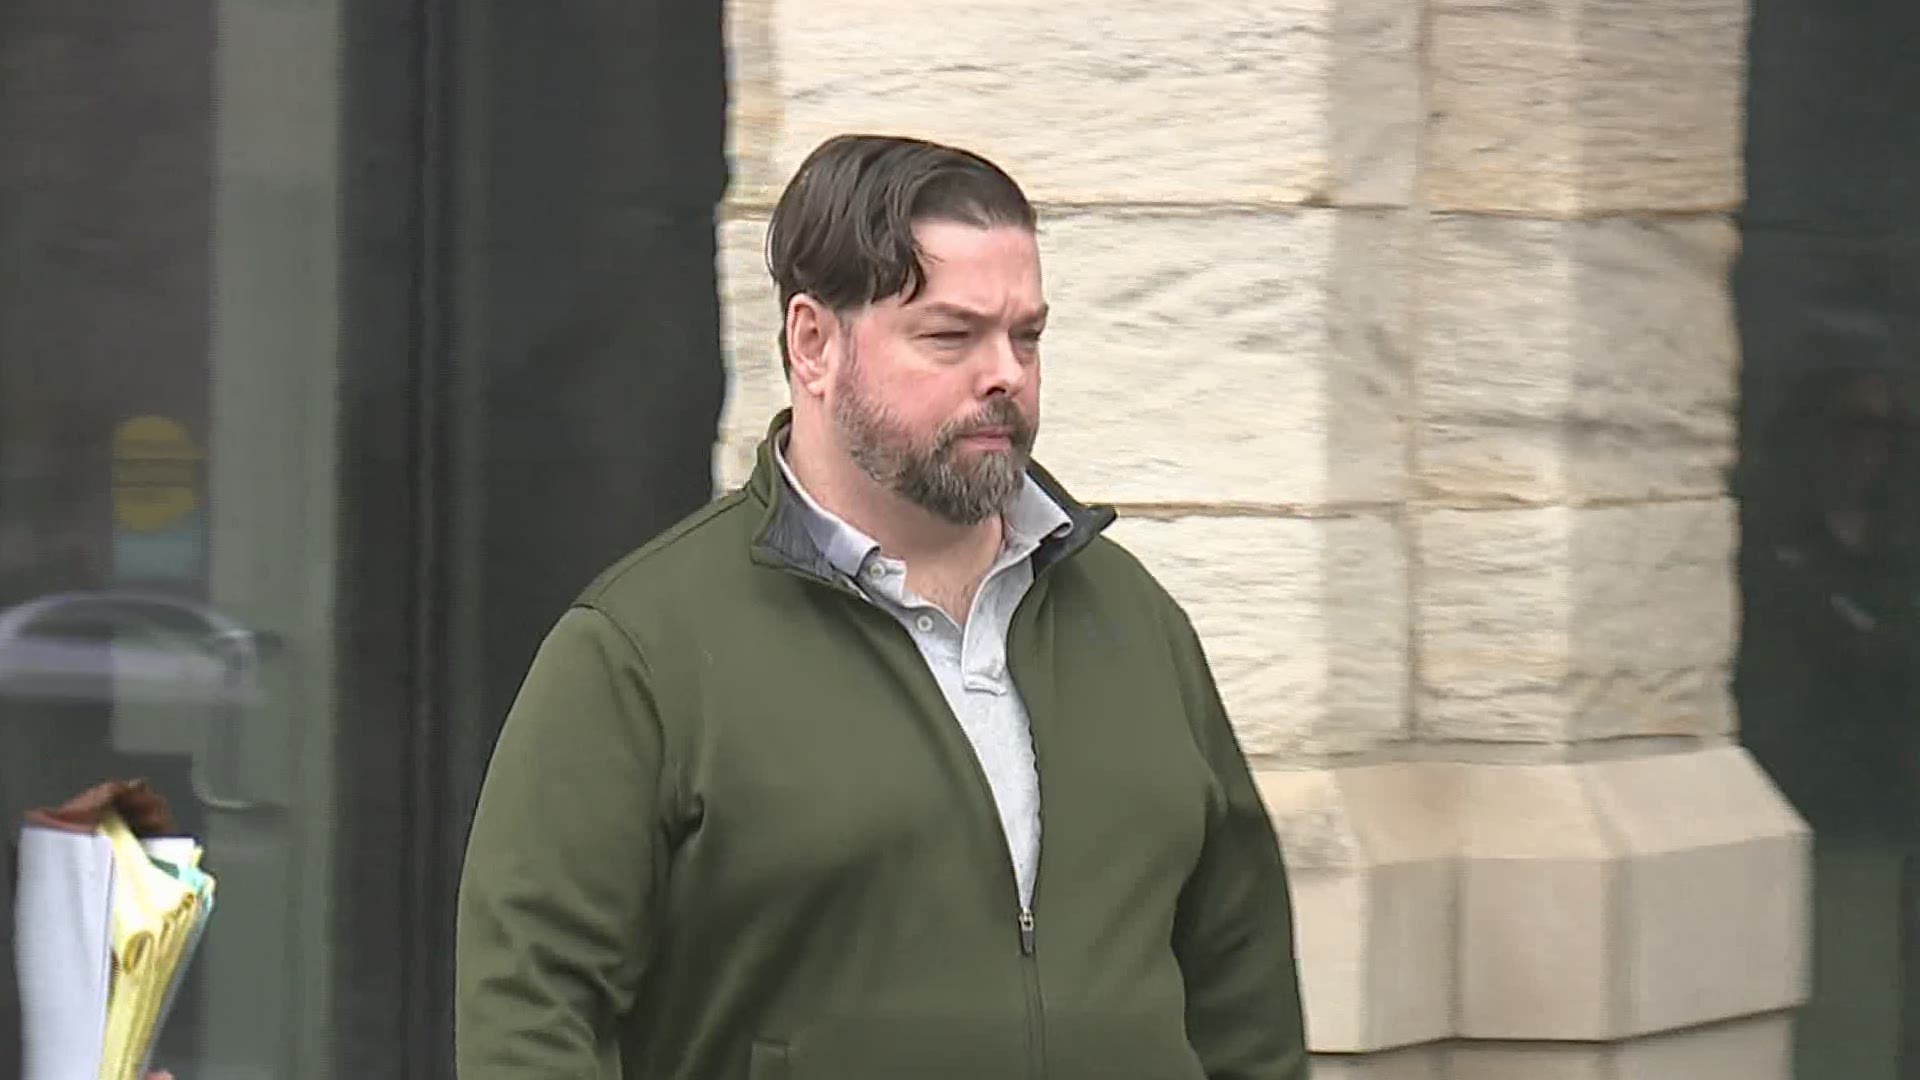 The allegations came out after a hearing Tuesday in Lackawanna County court.